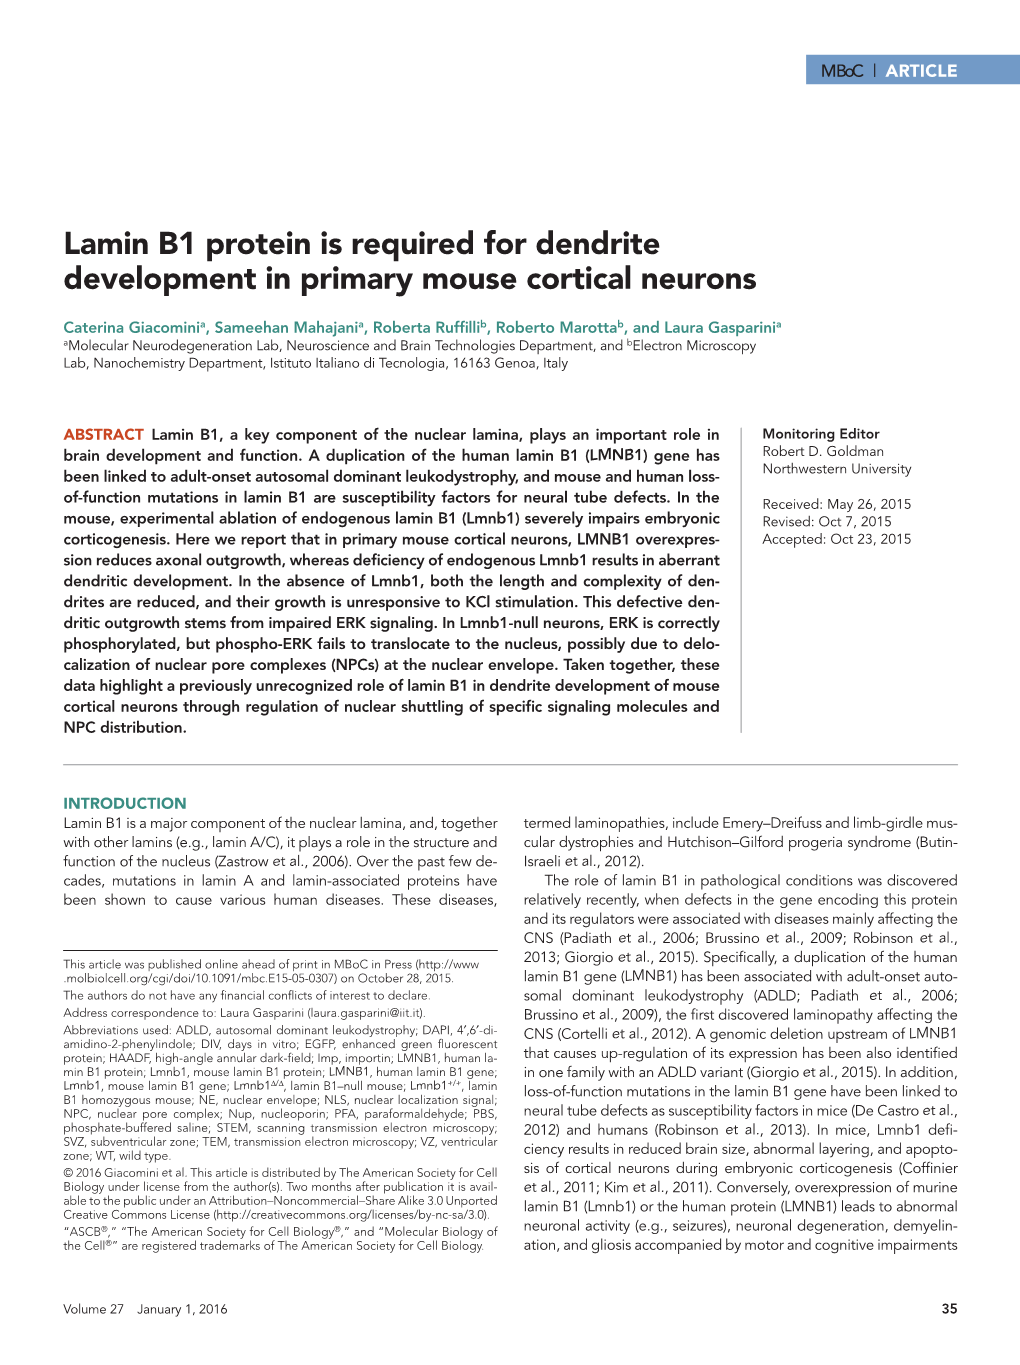 Lamin B1 Protein Is Required for Dendrite Development in Primary Mouse Cortical Neurons